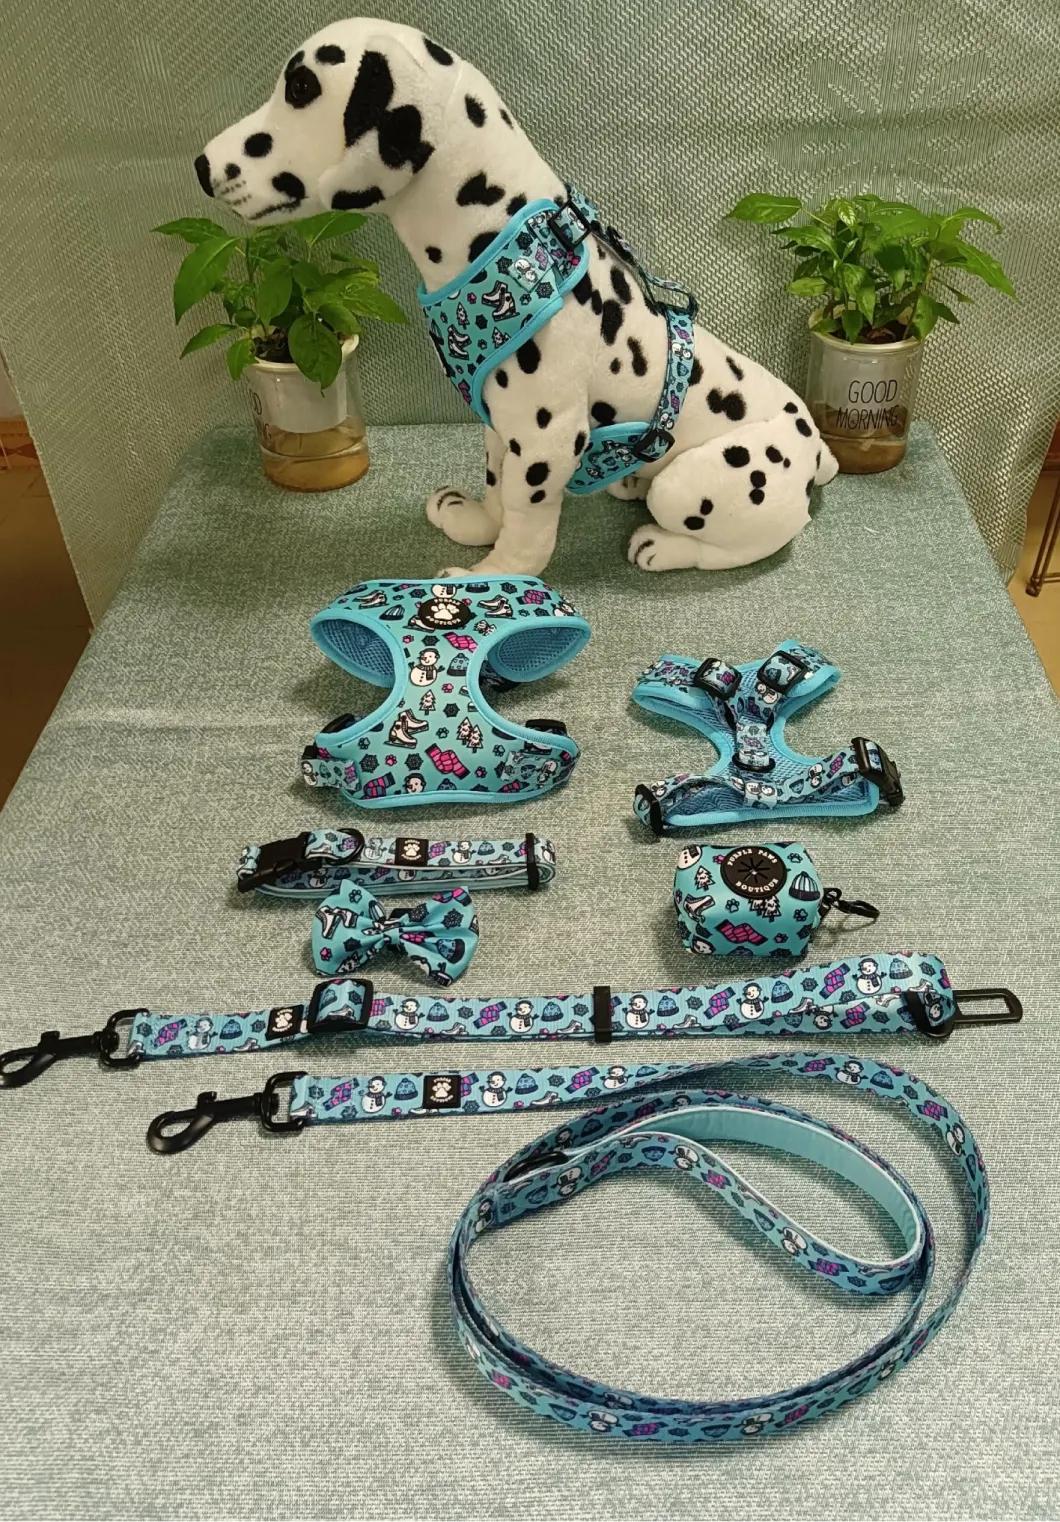 Customized Puppy Harness, Embroidered Dog Harness, Customizable Material Puppy Supplies, Dog Harness Set with Custom Logo and Pattern